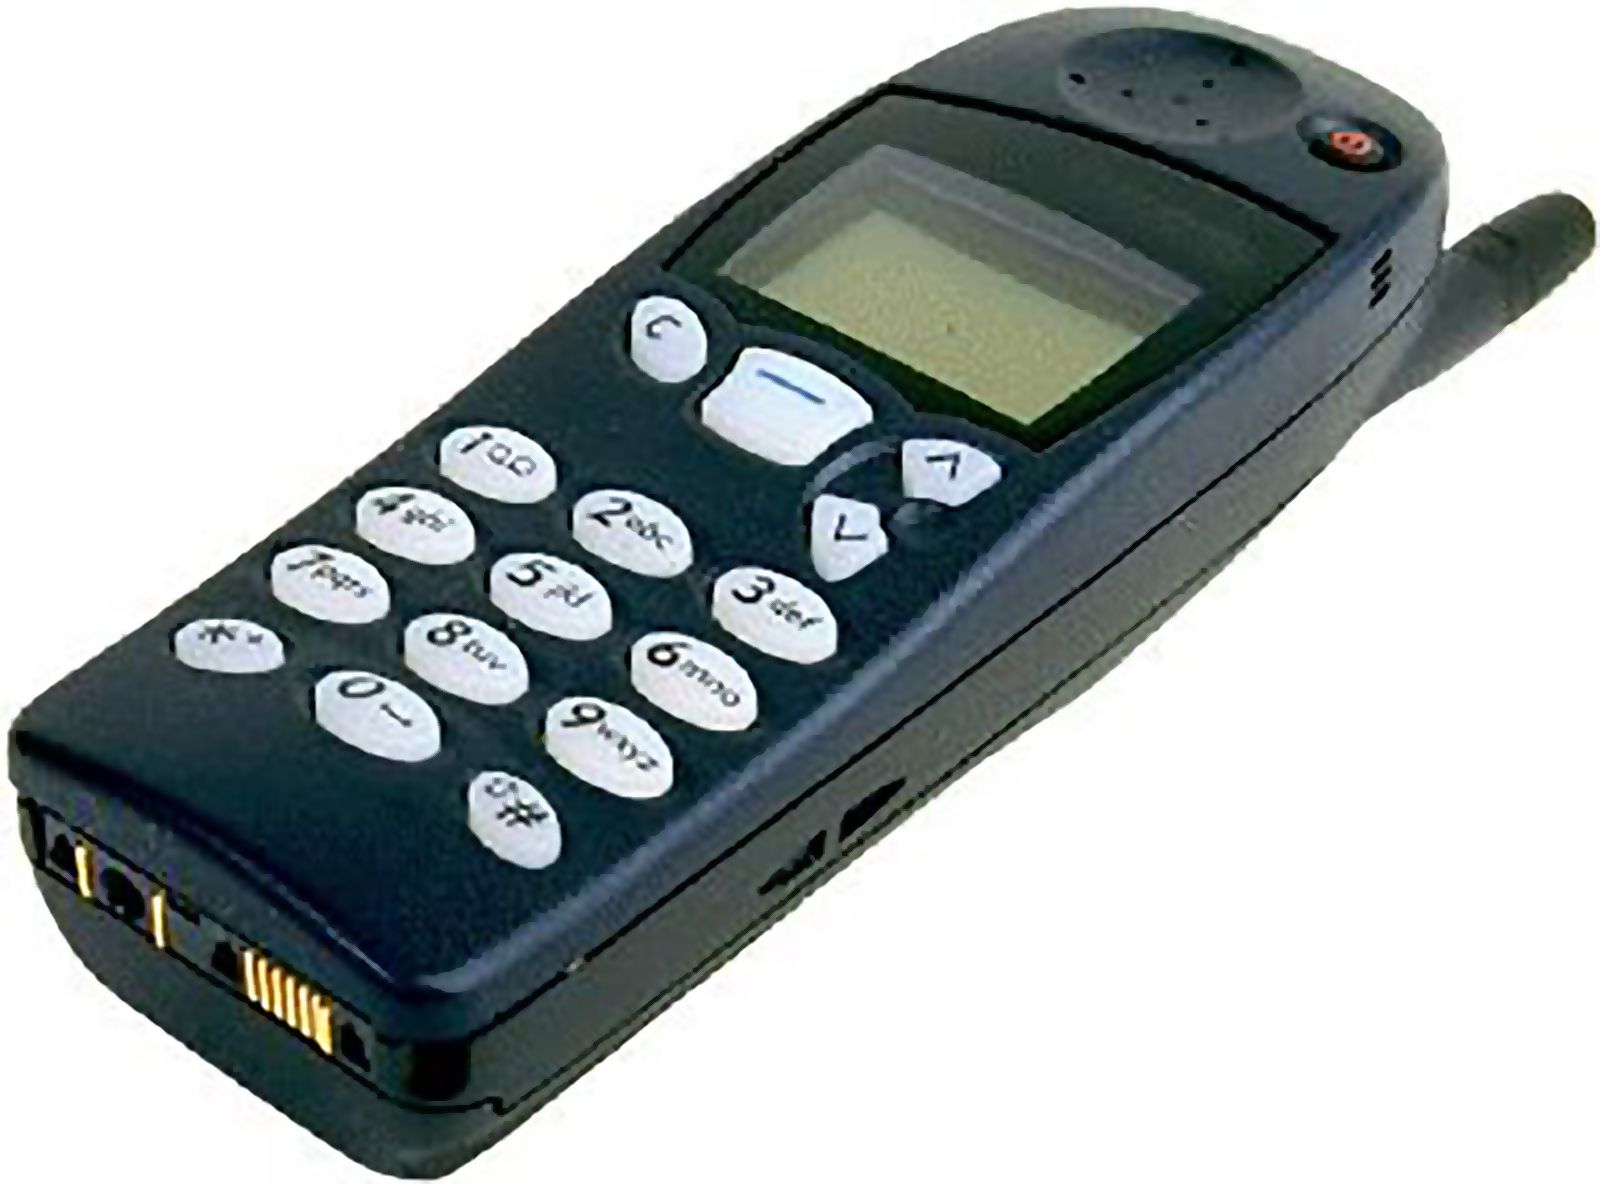 Iconic Gadgets Of The 90s Amazing Gadgets And Gizmos From Yesteryear image 20